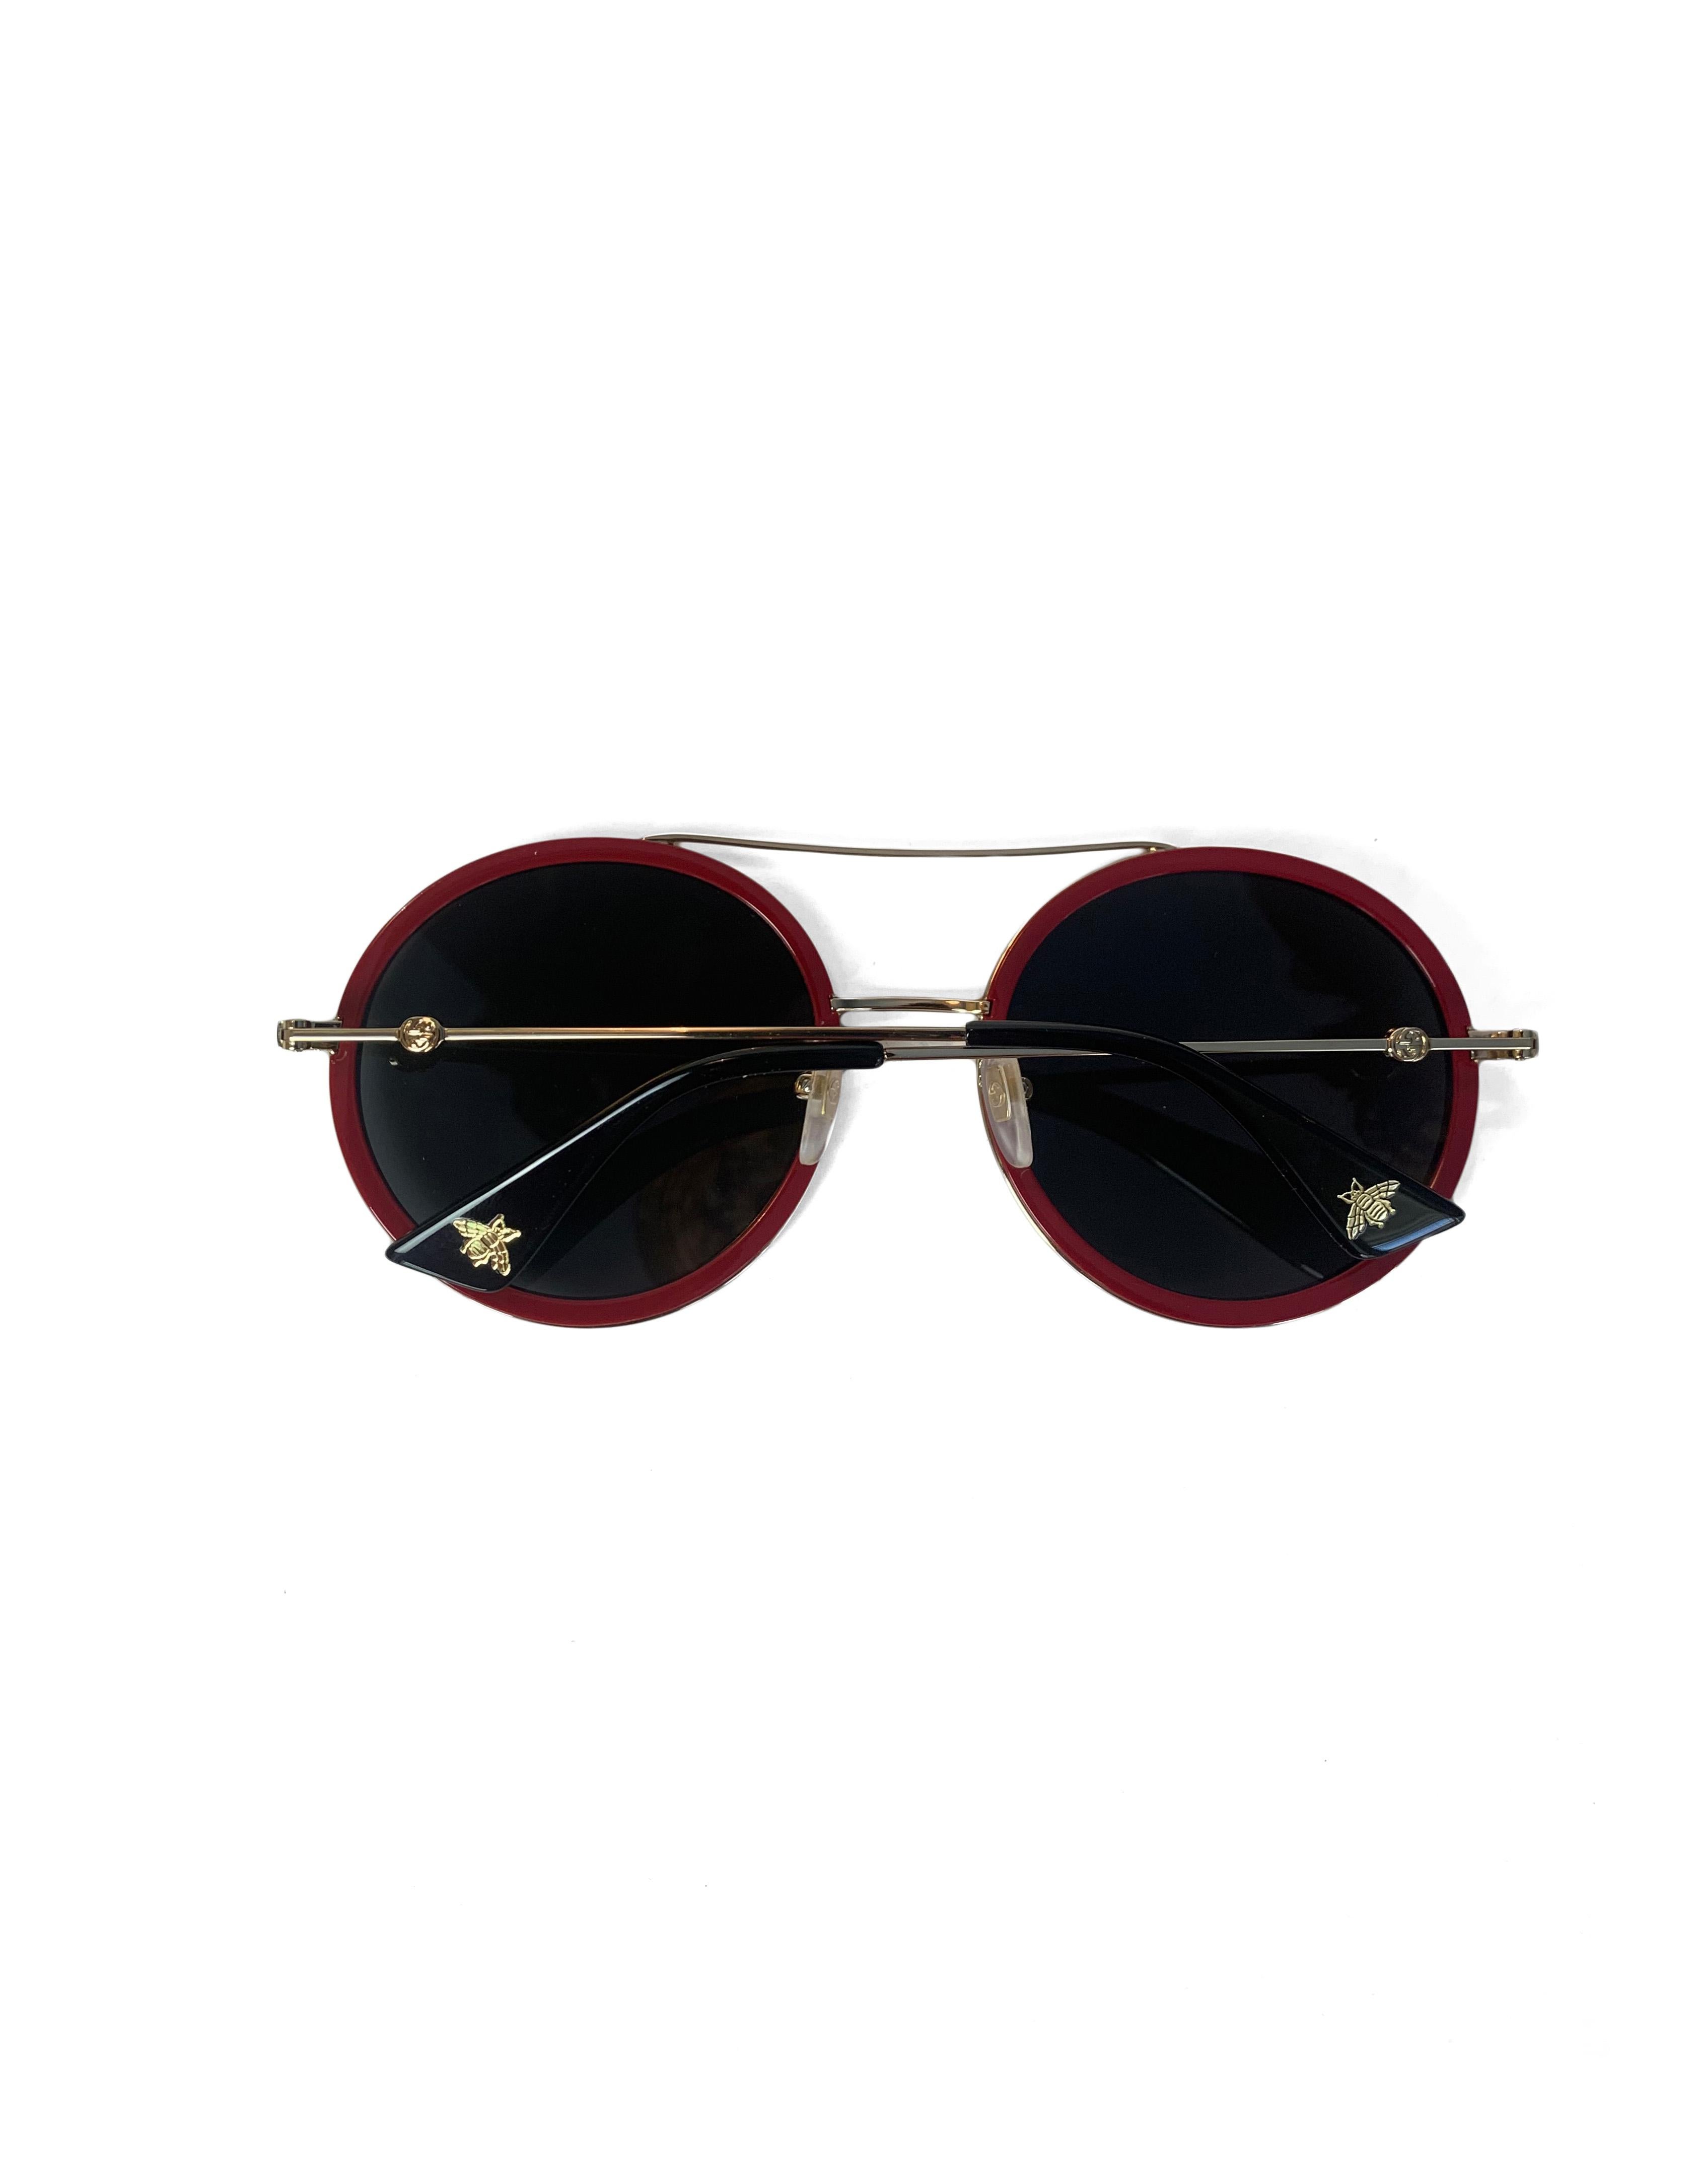 Black Gucci GG0061S Red Crystal Studded Round Frame Sunglasses